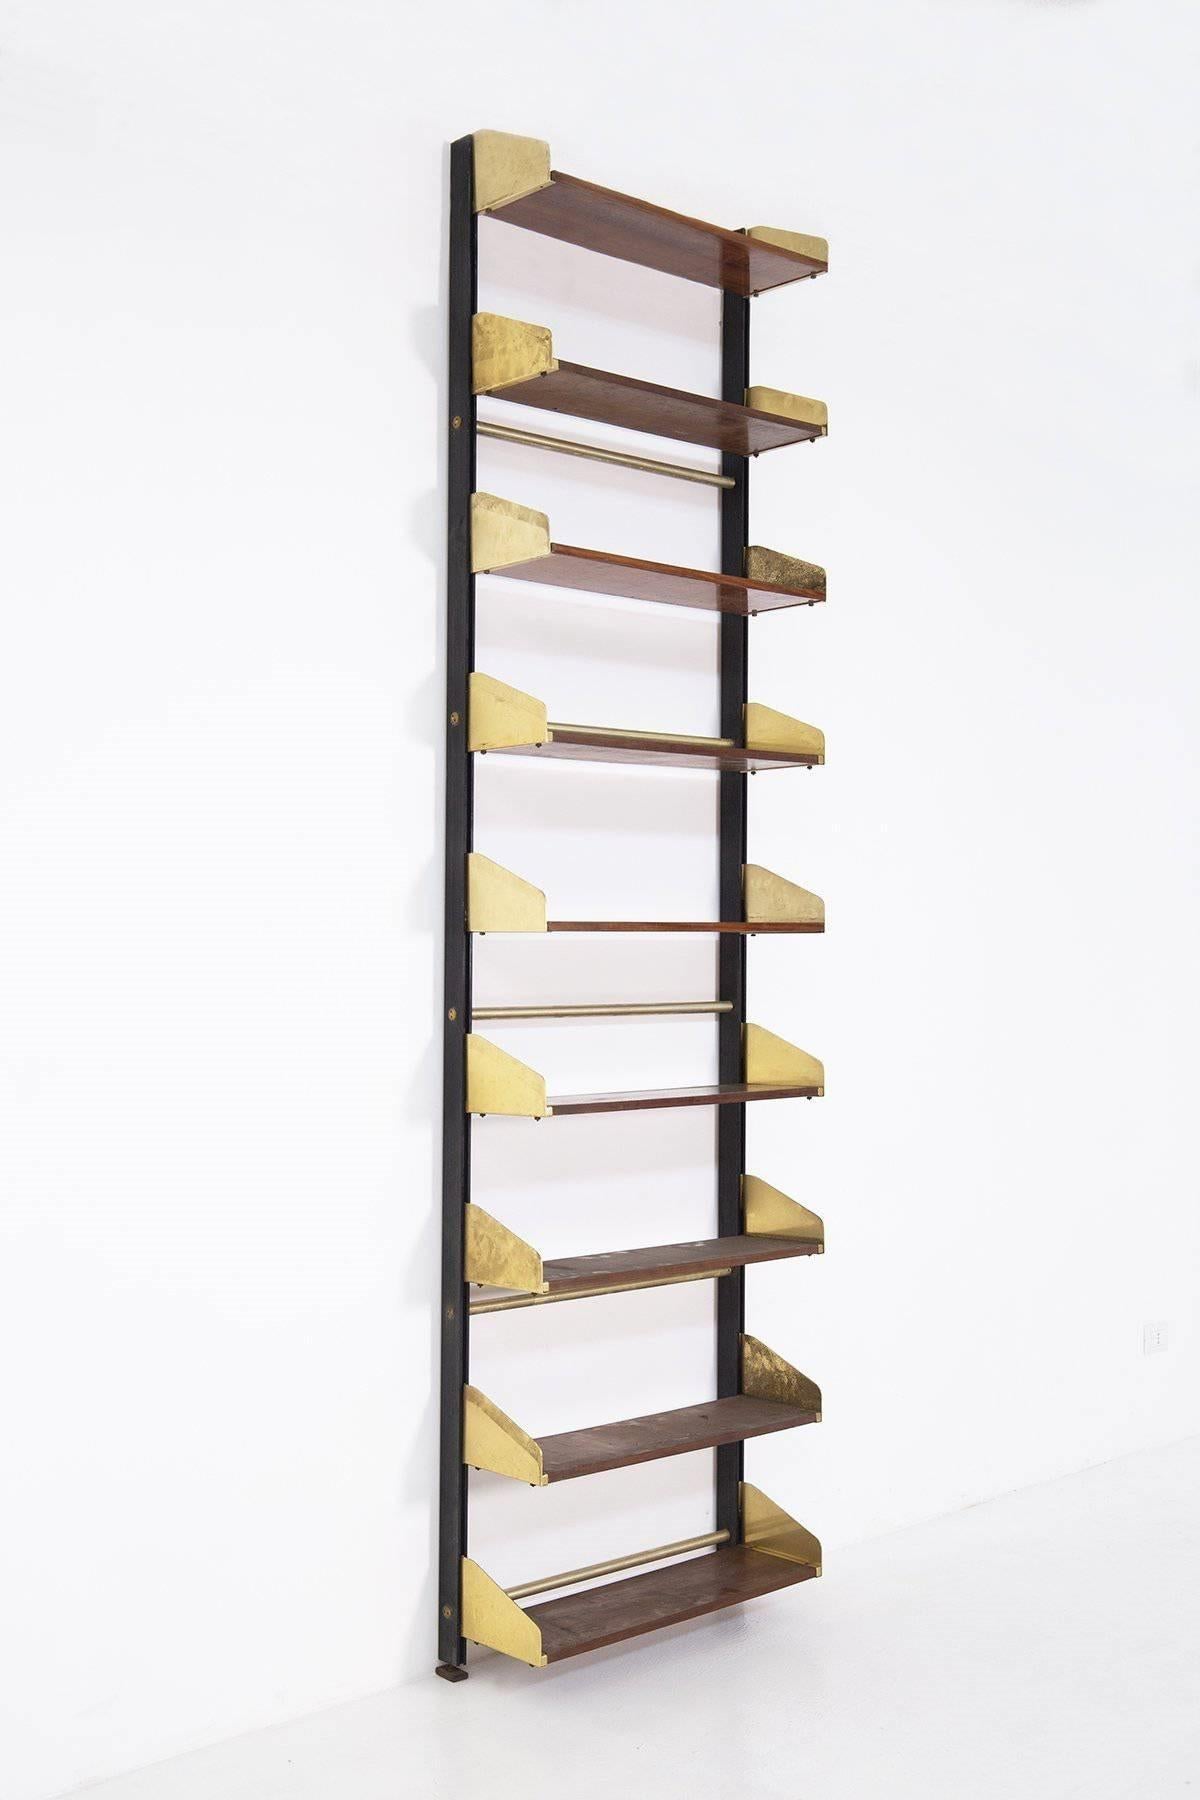 A wall-mounted bookcase designed and produced by FEAL, Italy, 1950s. Produced in brass, lacquered metal, and wood.